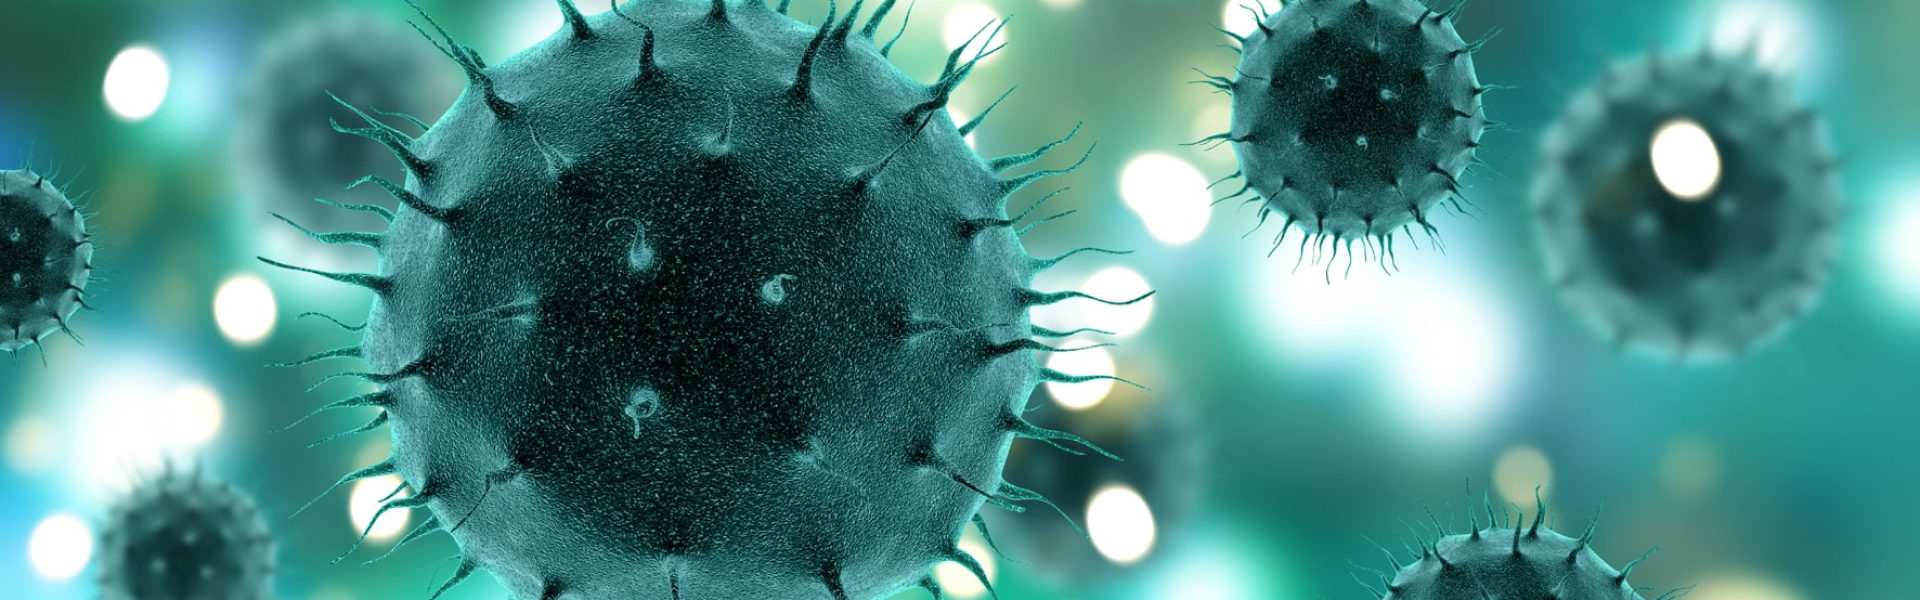 3D render of a medical background with abstract virus cells